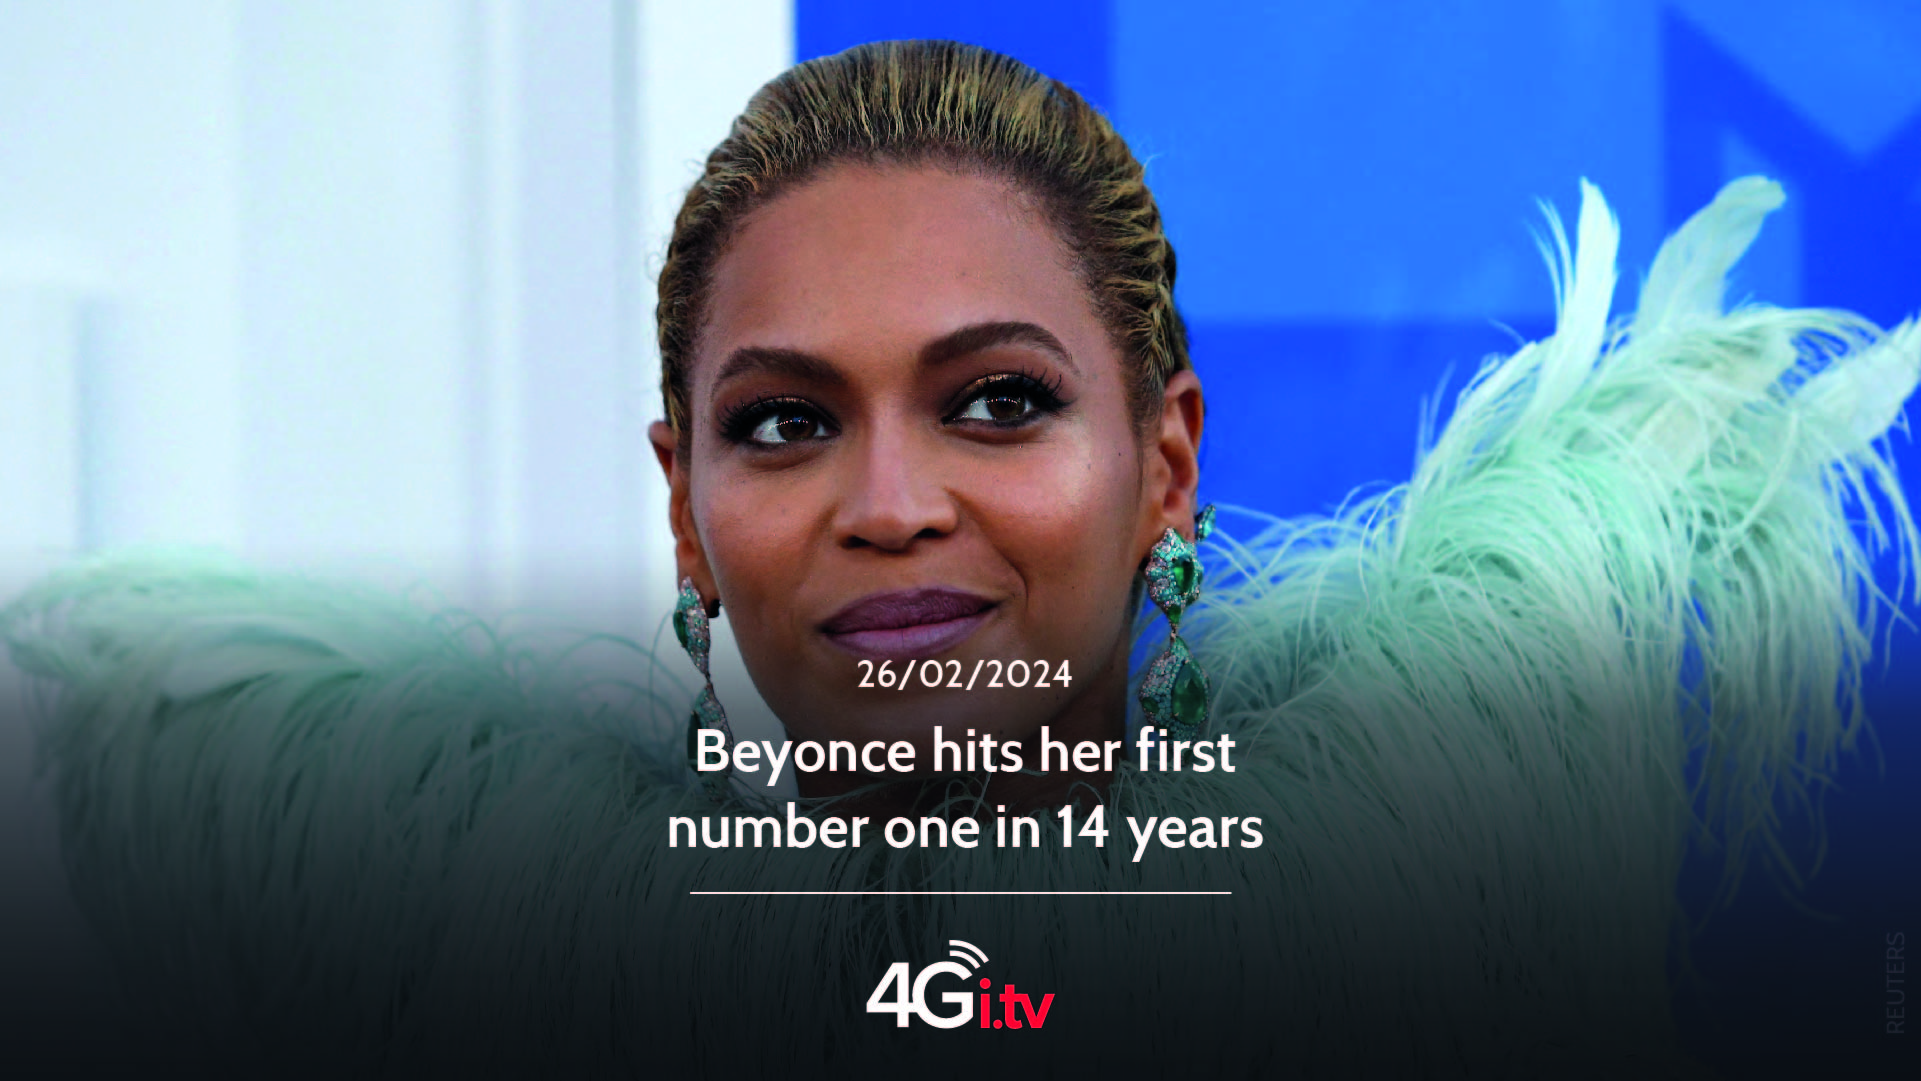 Подробнее о статье Beyonce hits her first number one in 14 years